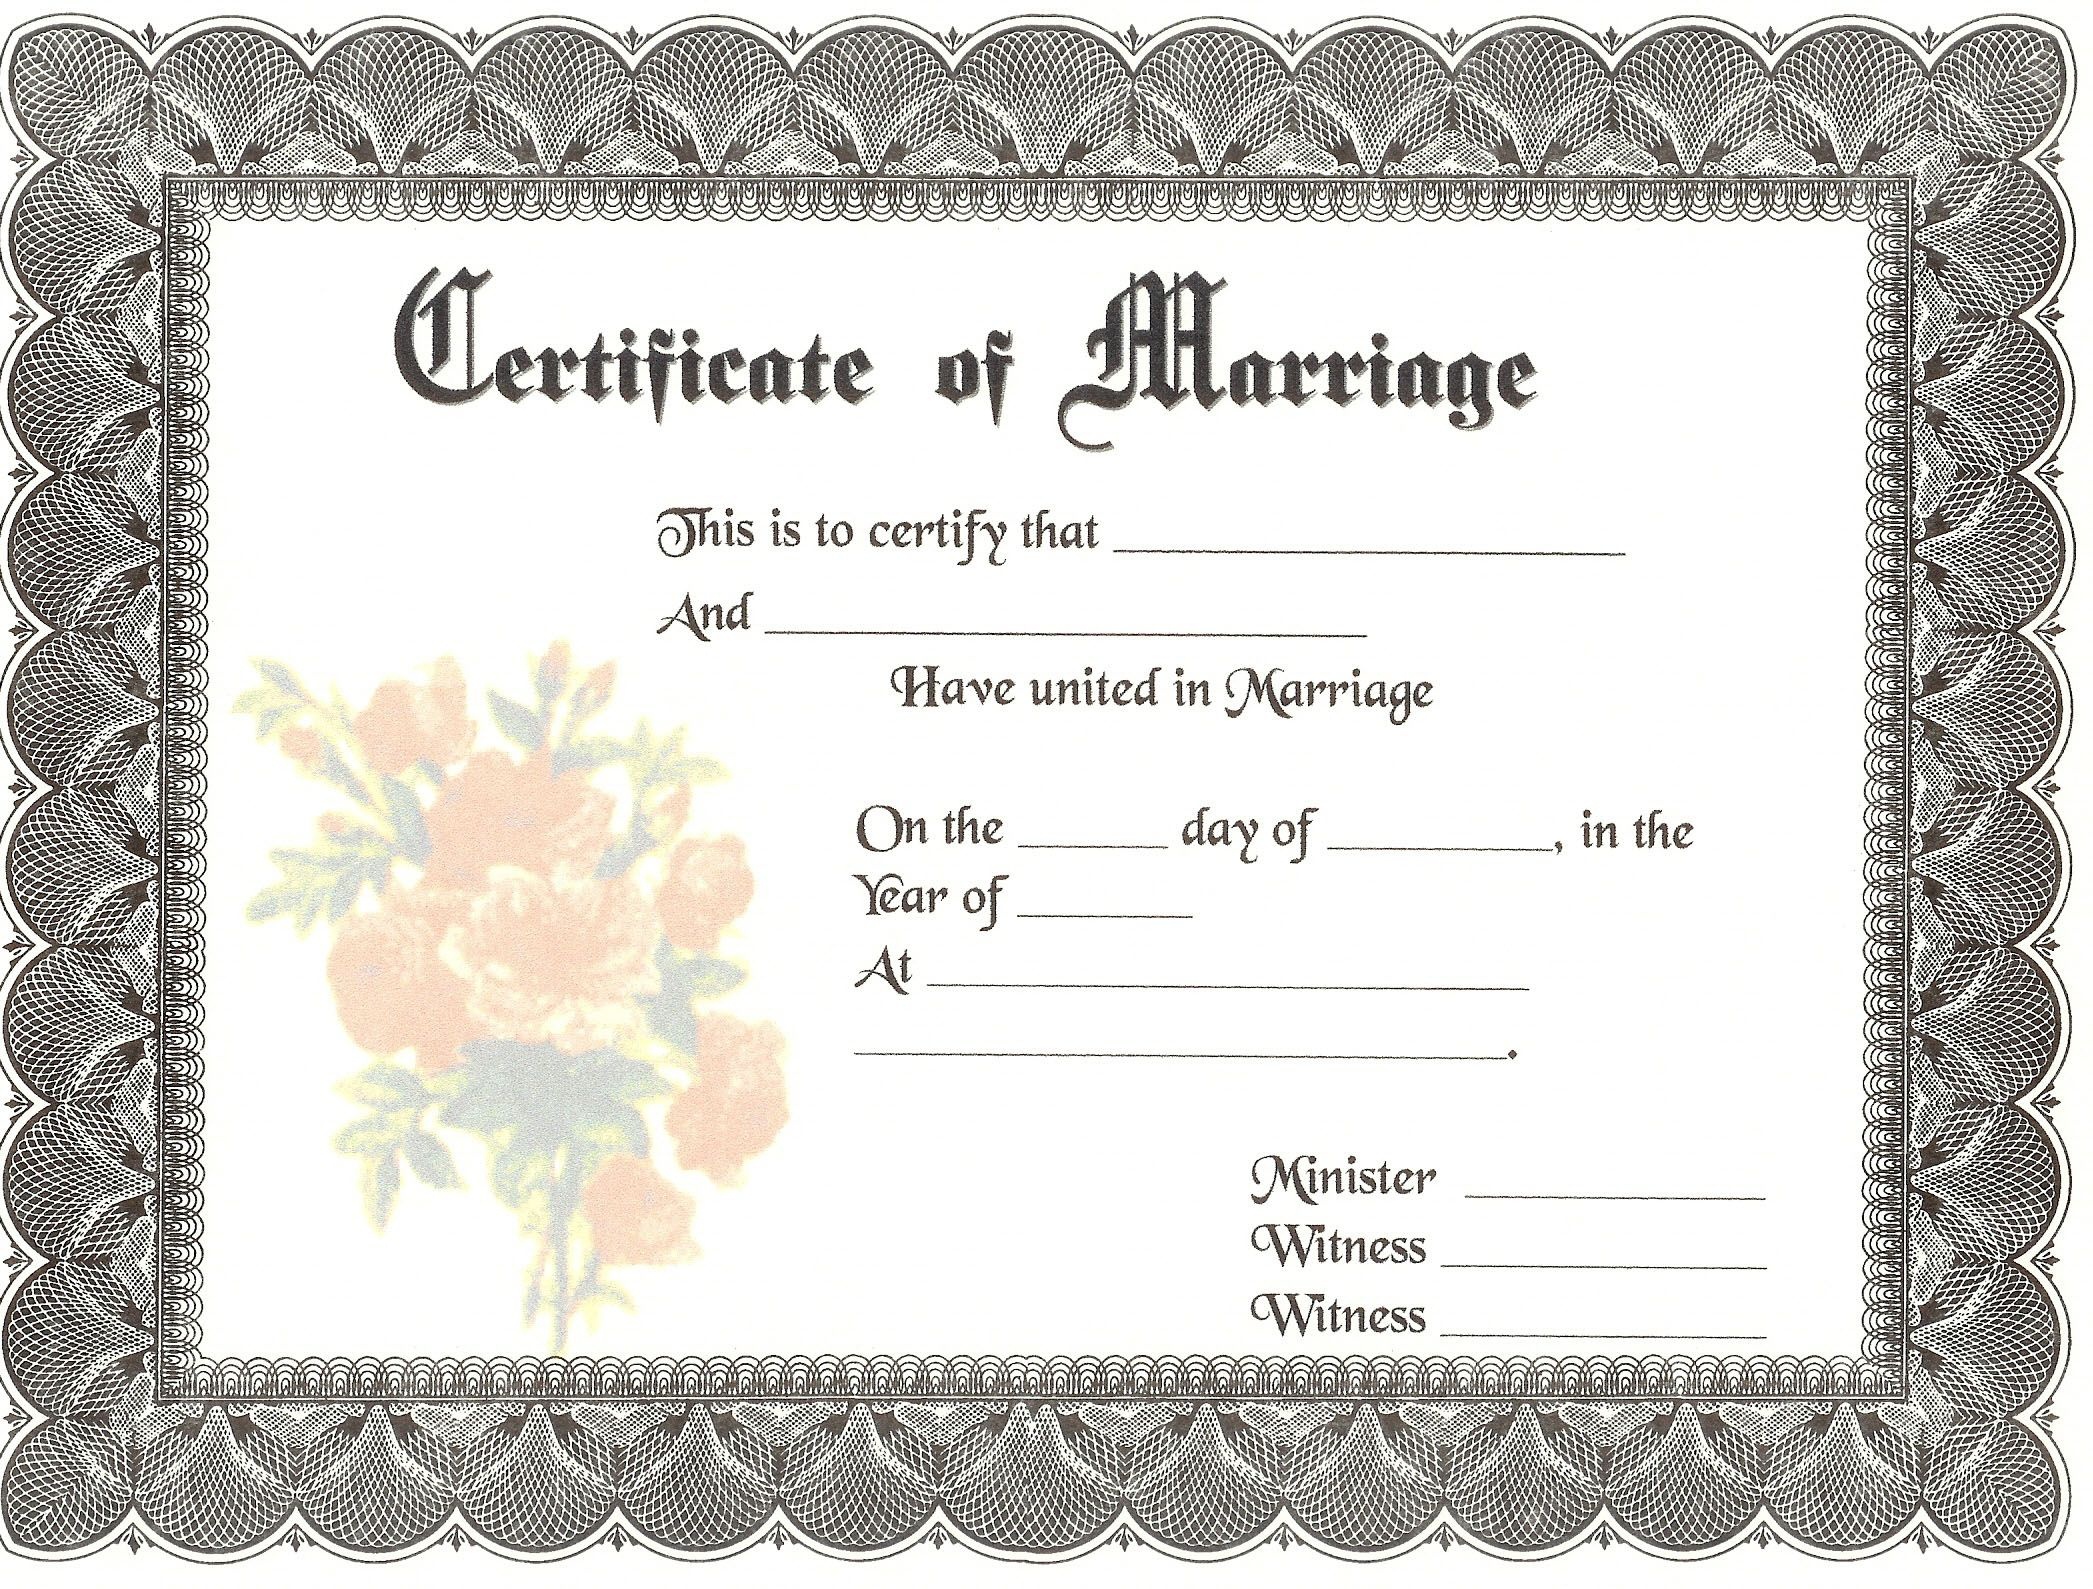 Blank Marriage Certificates | Download Blank Marriage Certificates - Fake Marriage Certificate Printable Free